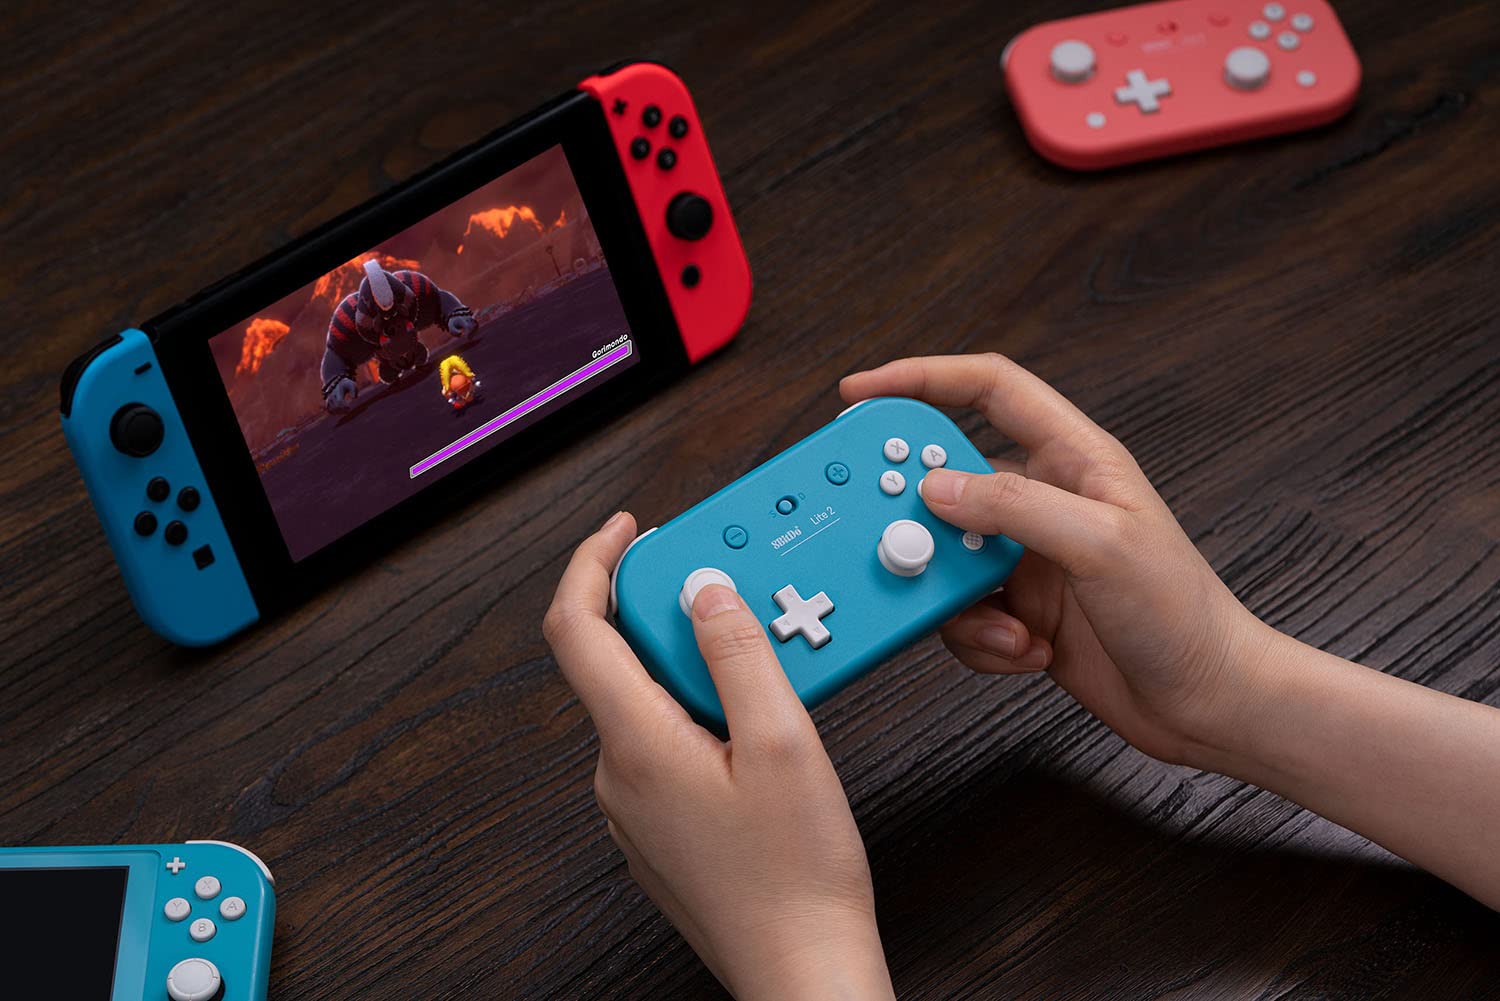 8Bitdo Lite 2 Bluetooth Gamepad for Switch, Switch Lite, Android and Raspberry Pi (Turquoise)